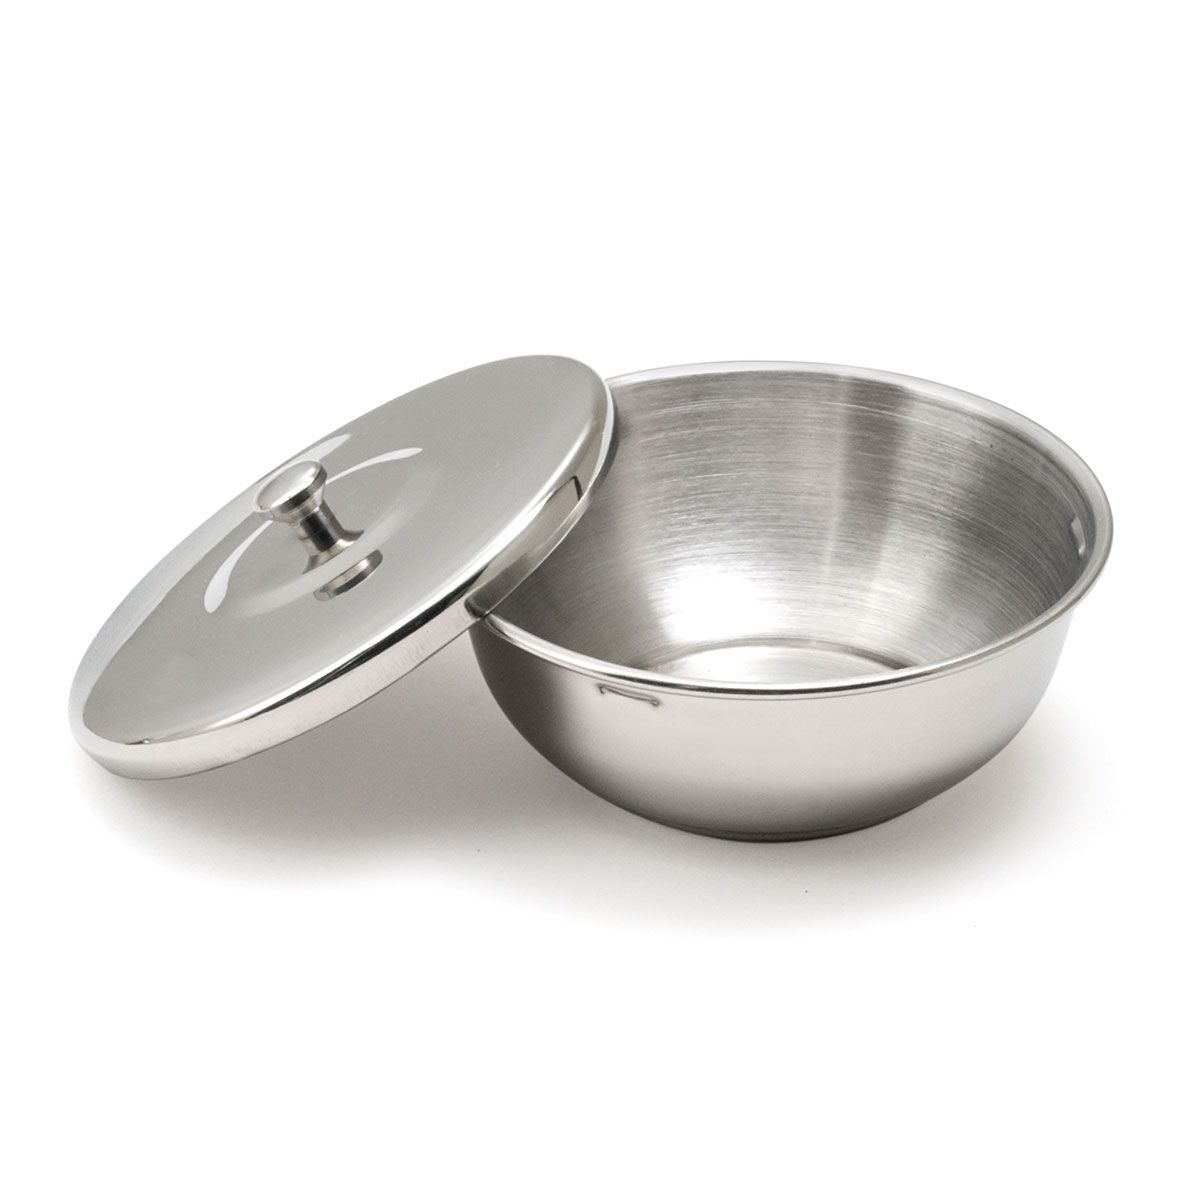 Razors accessories Stainless Steel Bowl